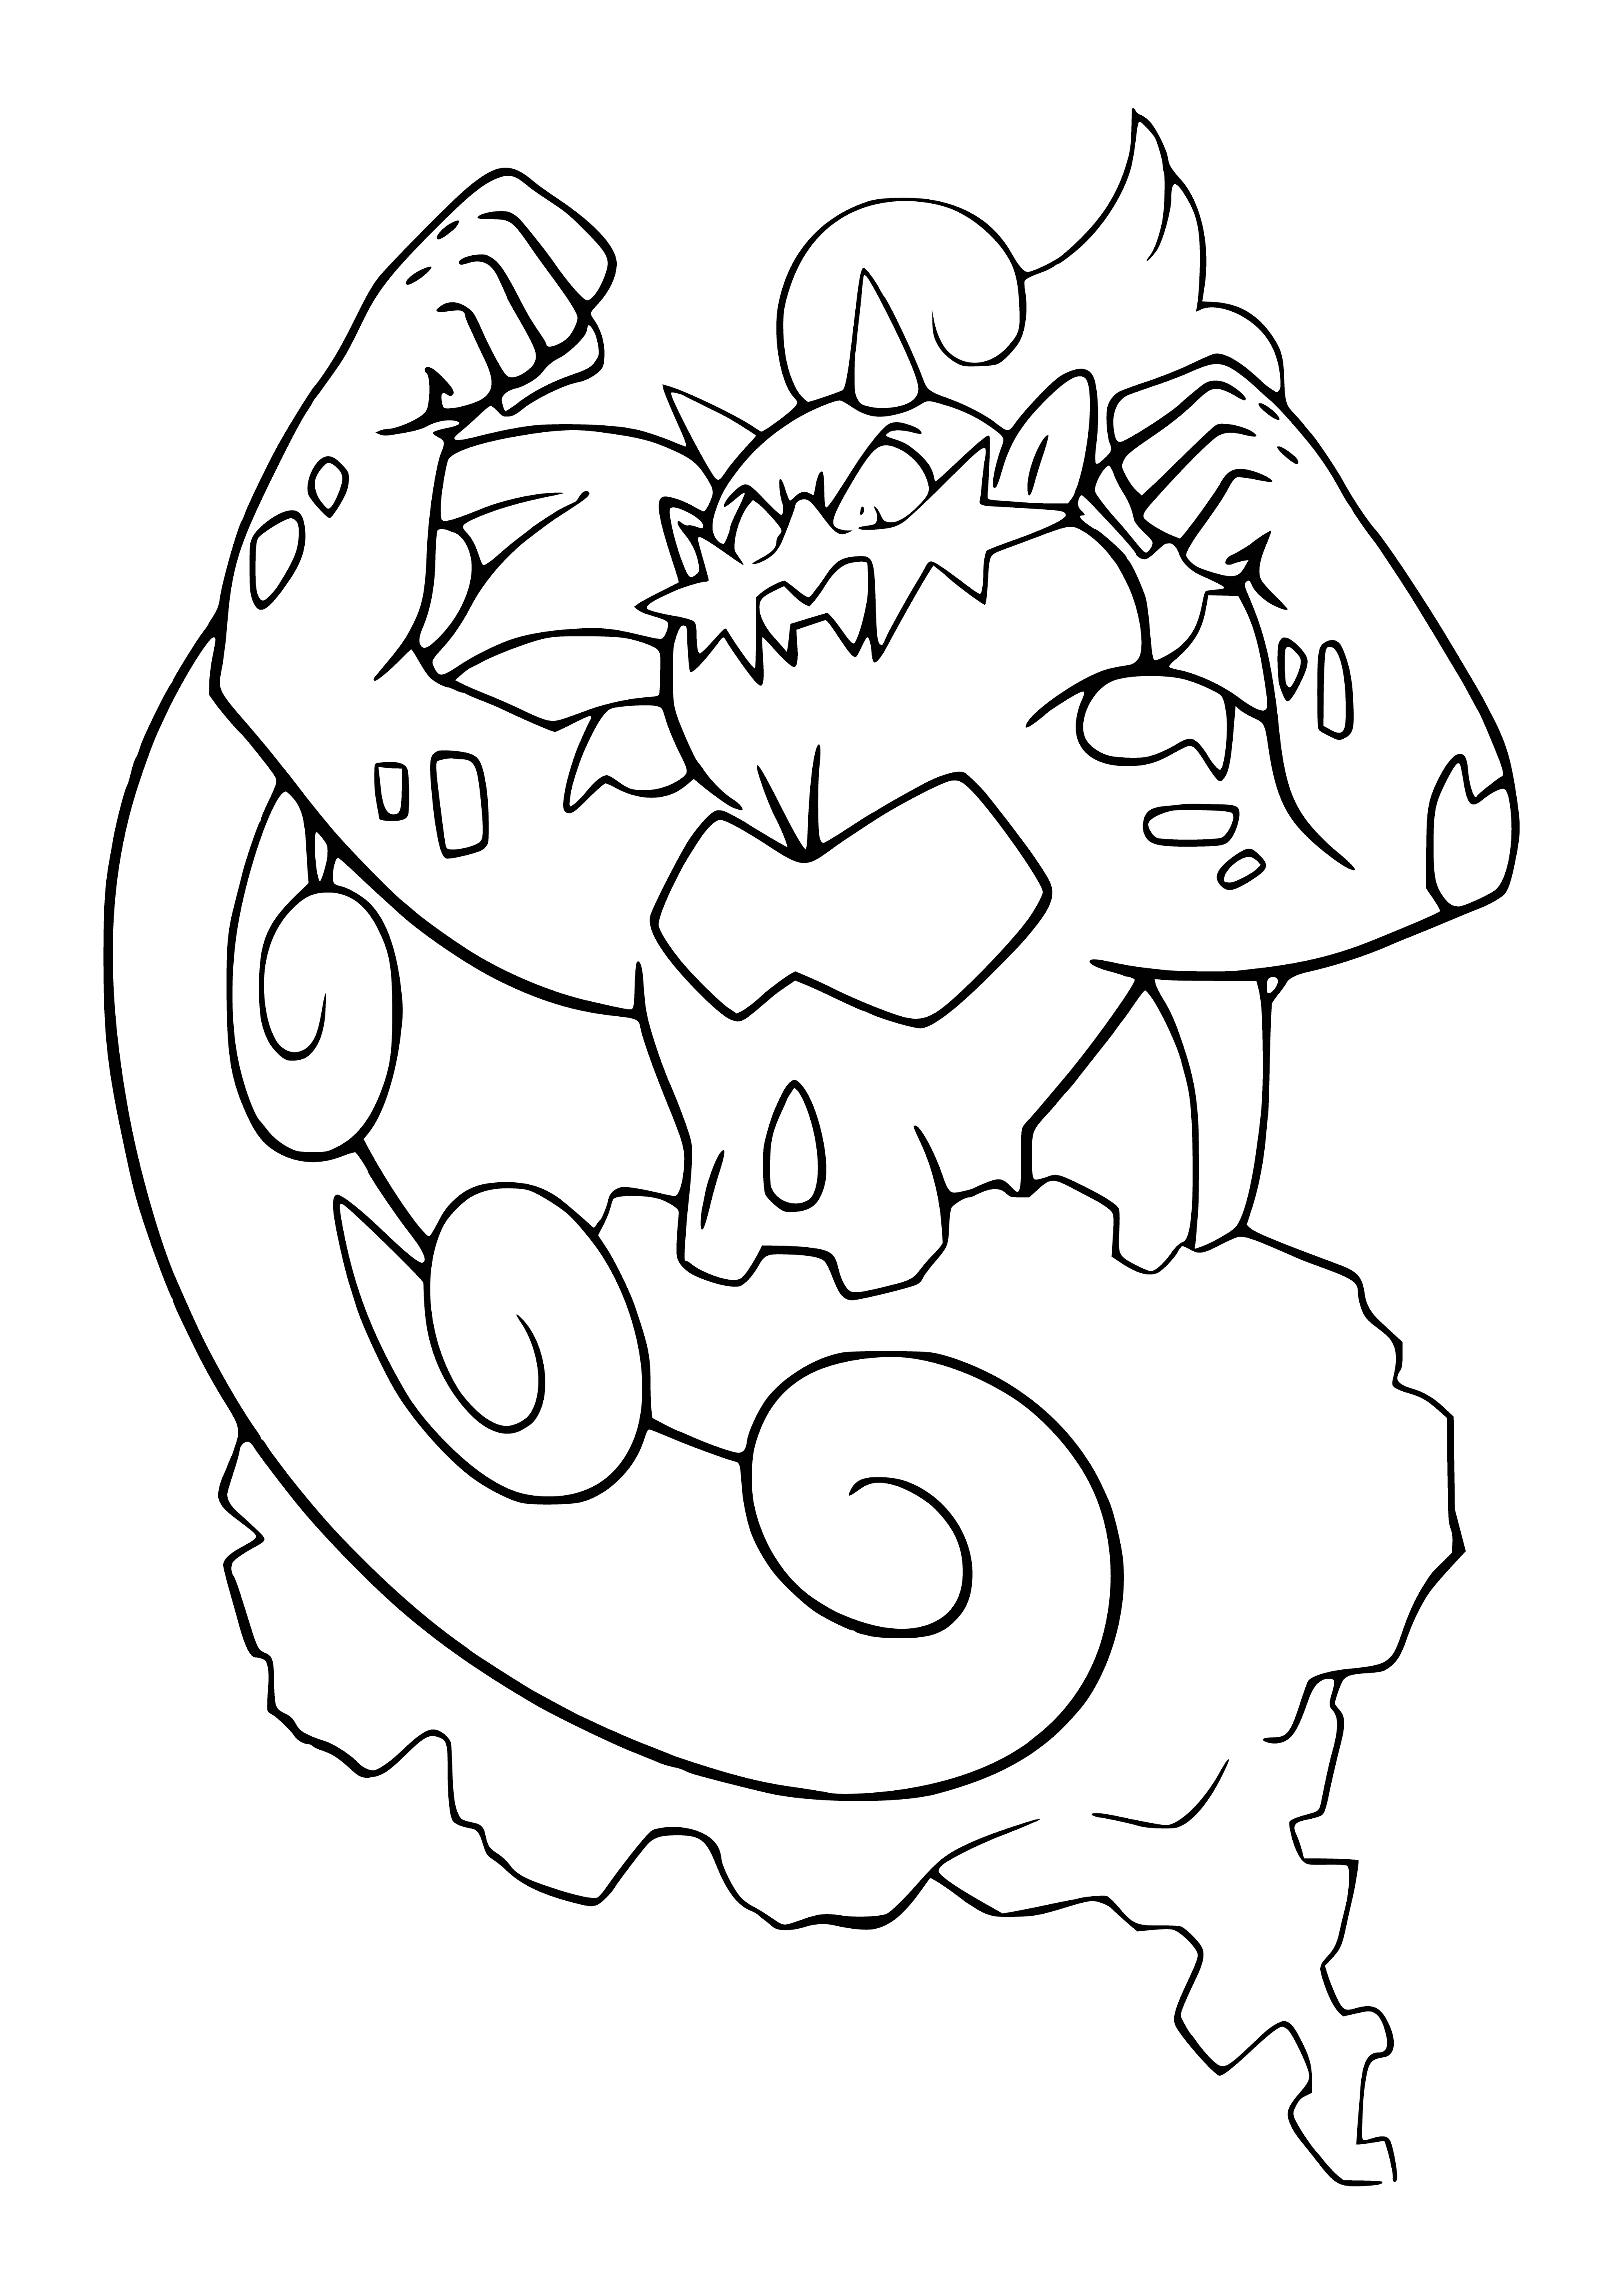 coloring page: Tornadus, one of the Legendary Titans, is a Flying-type Pokemon with power to control wind & create storms & typhoons.